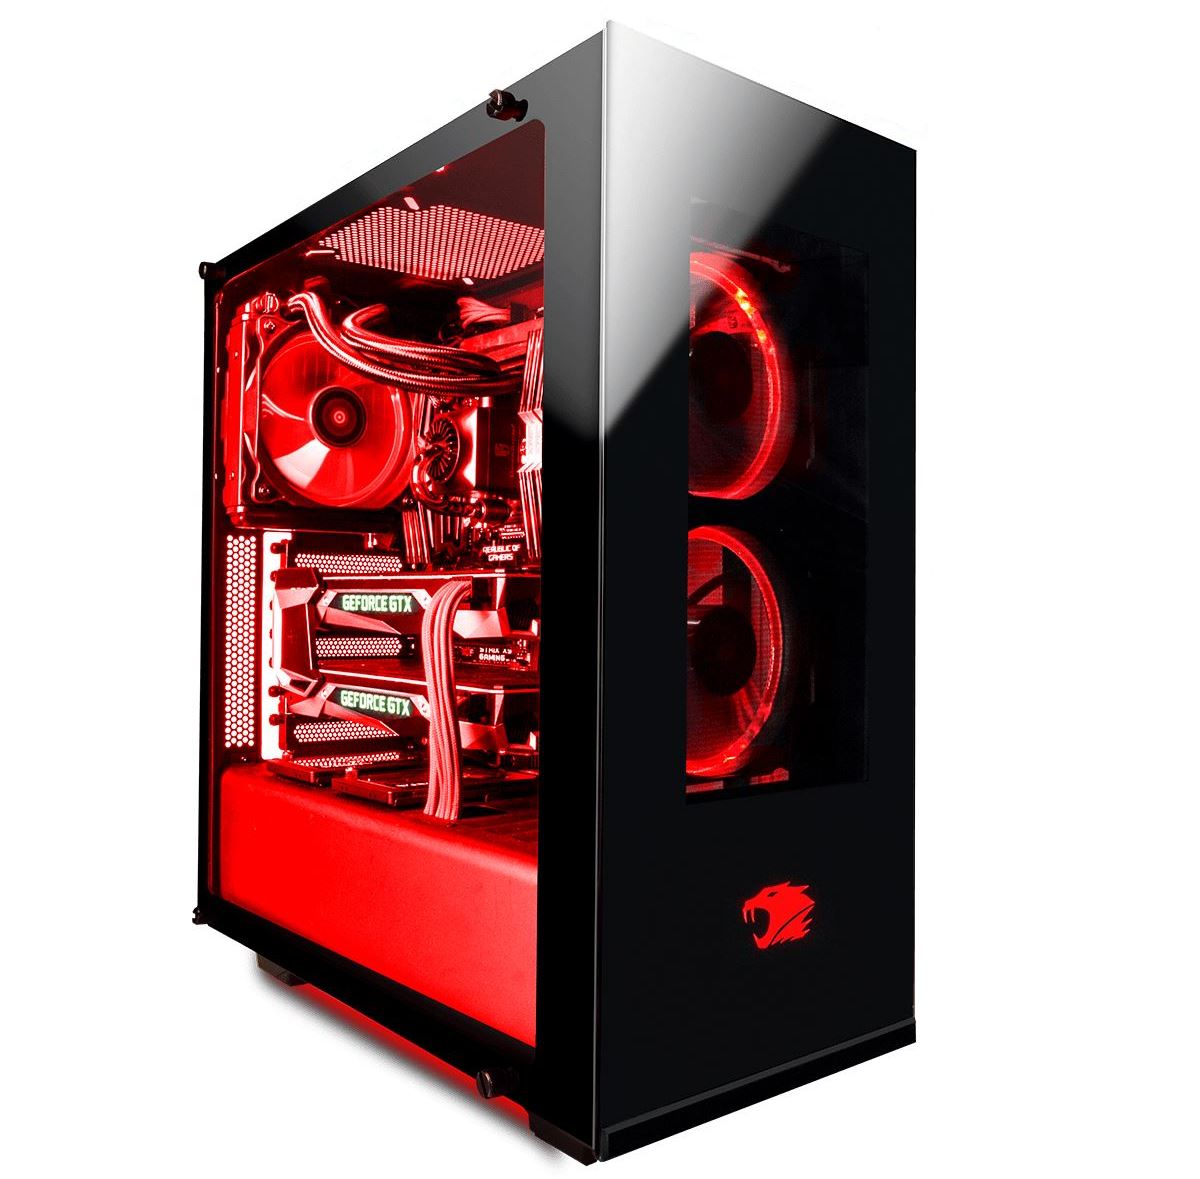 Ibuypower Element Gaming Pc Review I7 8086k And Gtx 1080 Ti Inside